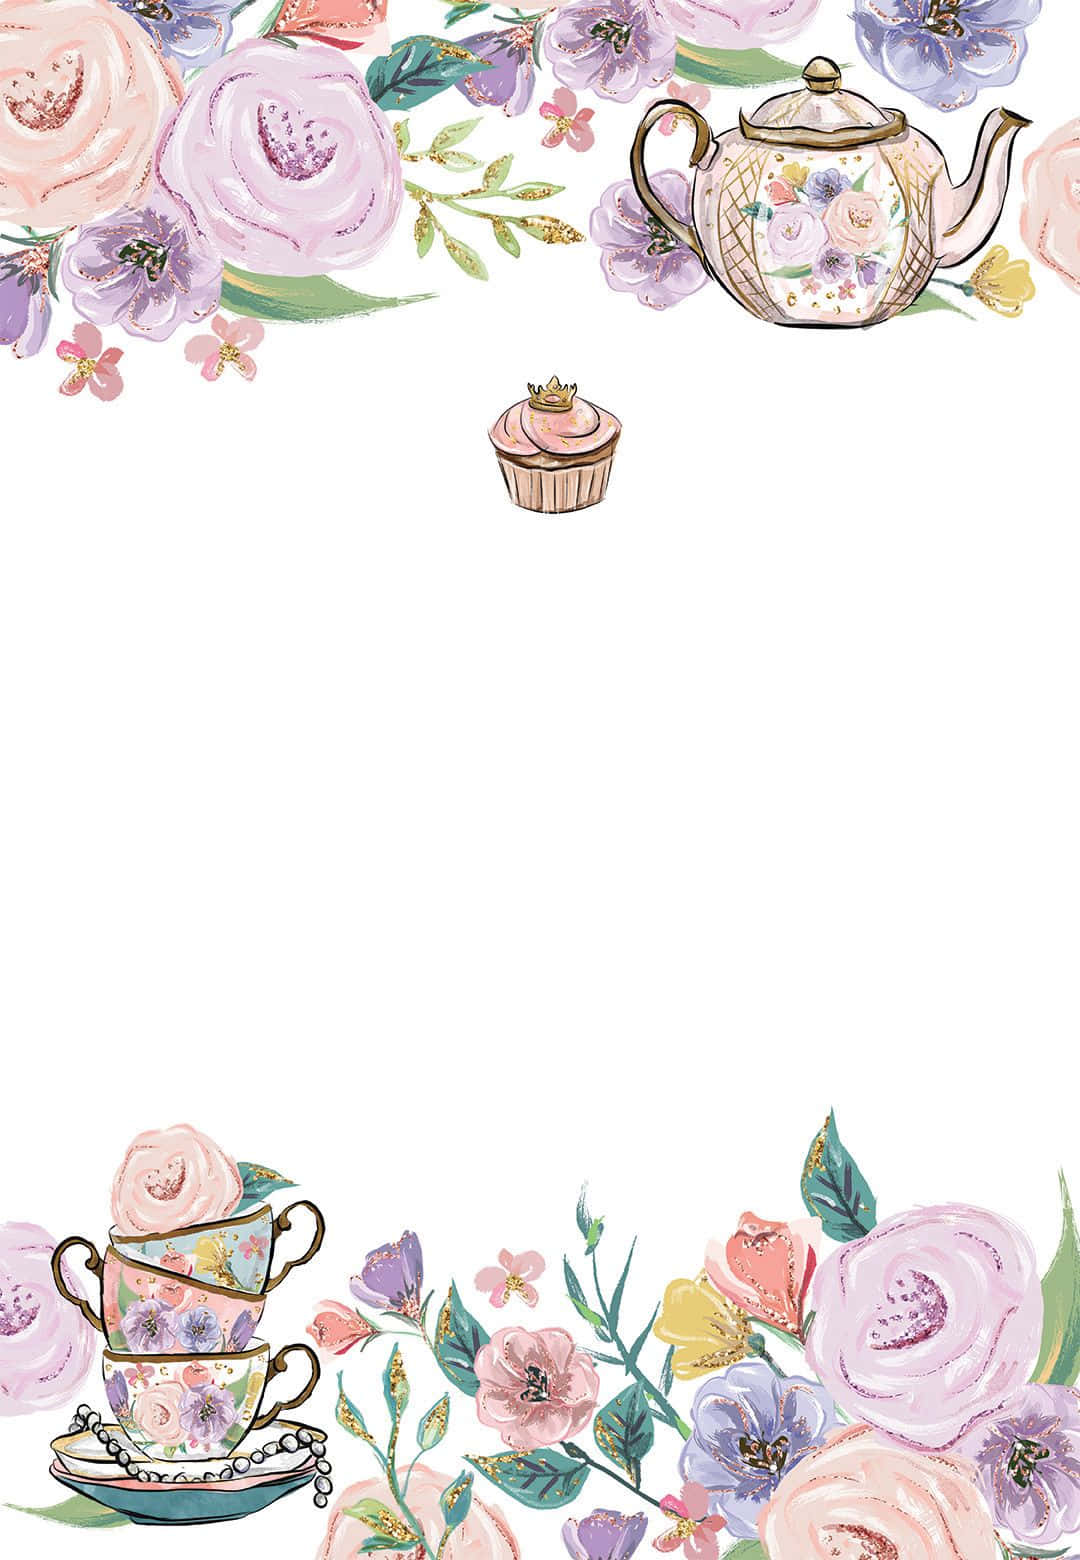 Download Celebrate a Special Occasion with a Tea Party. | Wallpapers.com